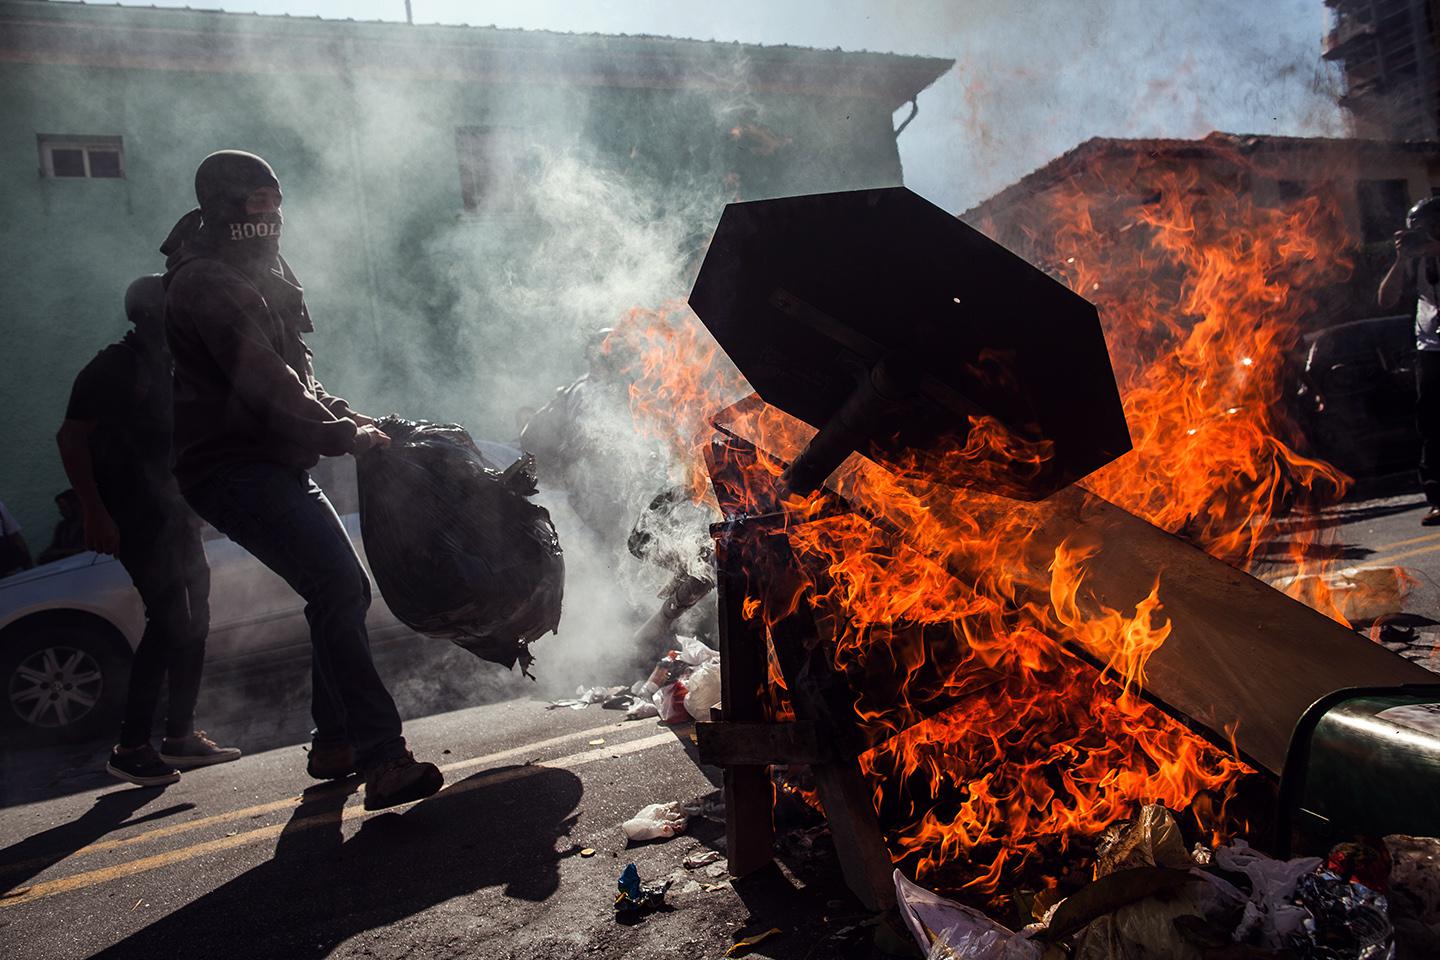 Demonstrators from the anarchist group Black Bloc clash with police during a protest against the World Cup on the opening day of the event on June 12, 2014 in Sao Paulo, Brazil.